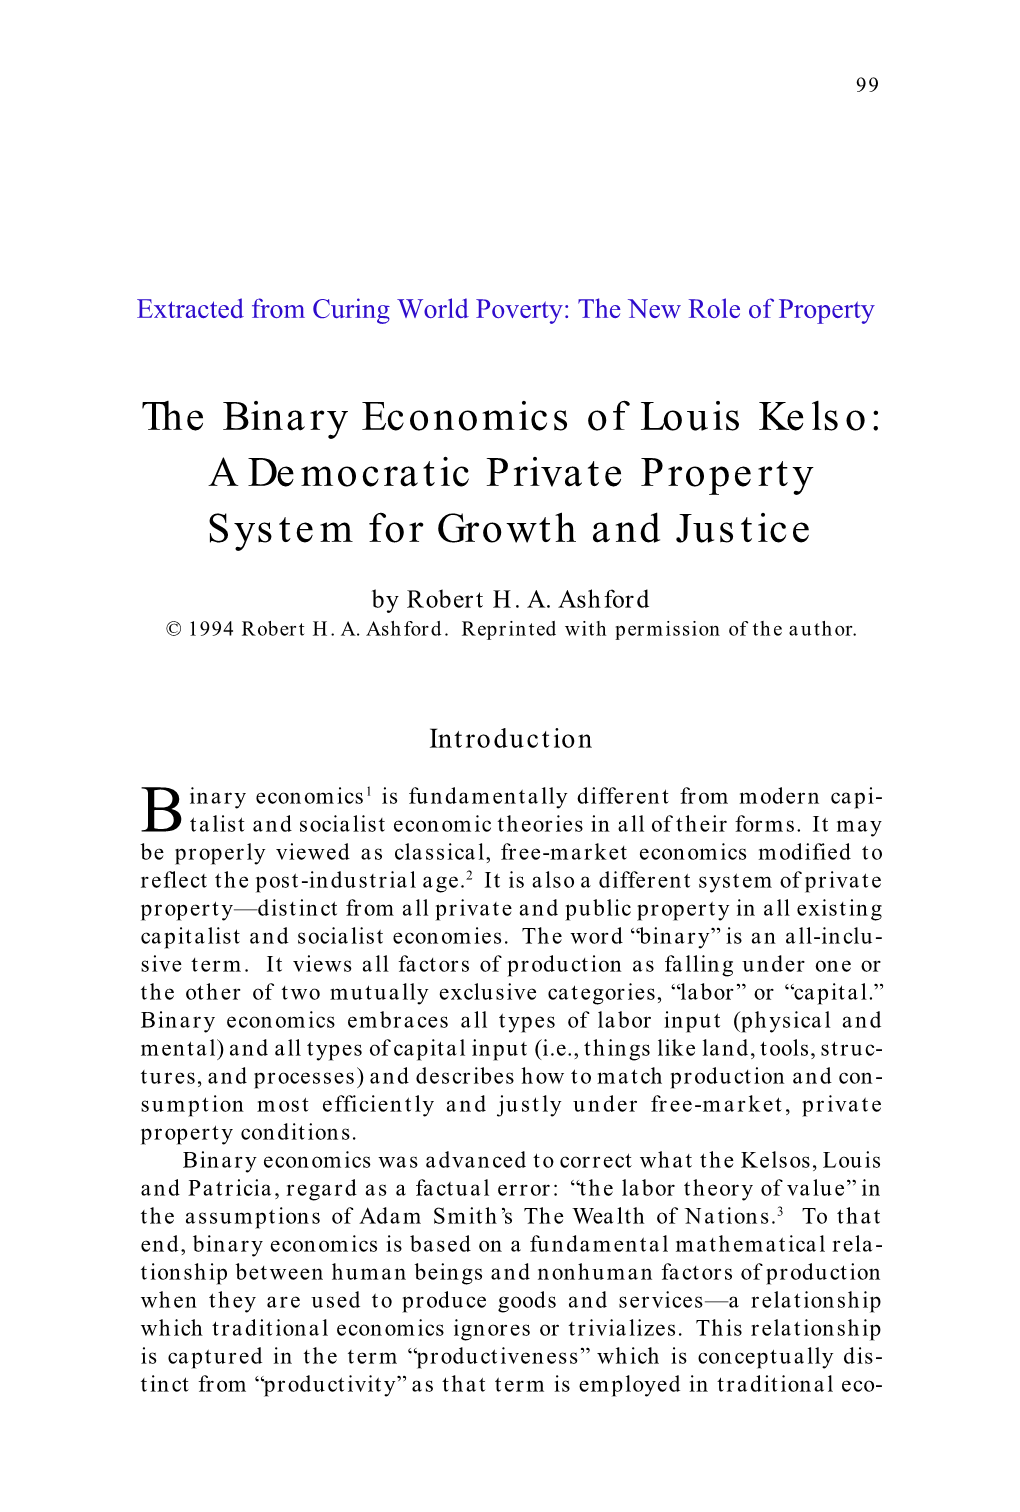 The Binary Economics of Louis Kelso: a Democratic Private Property System for Growth and Justice